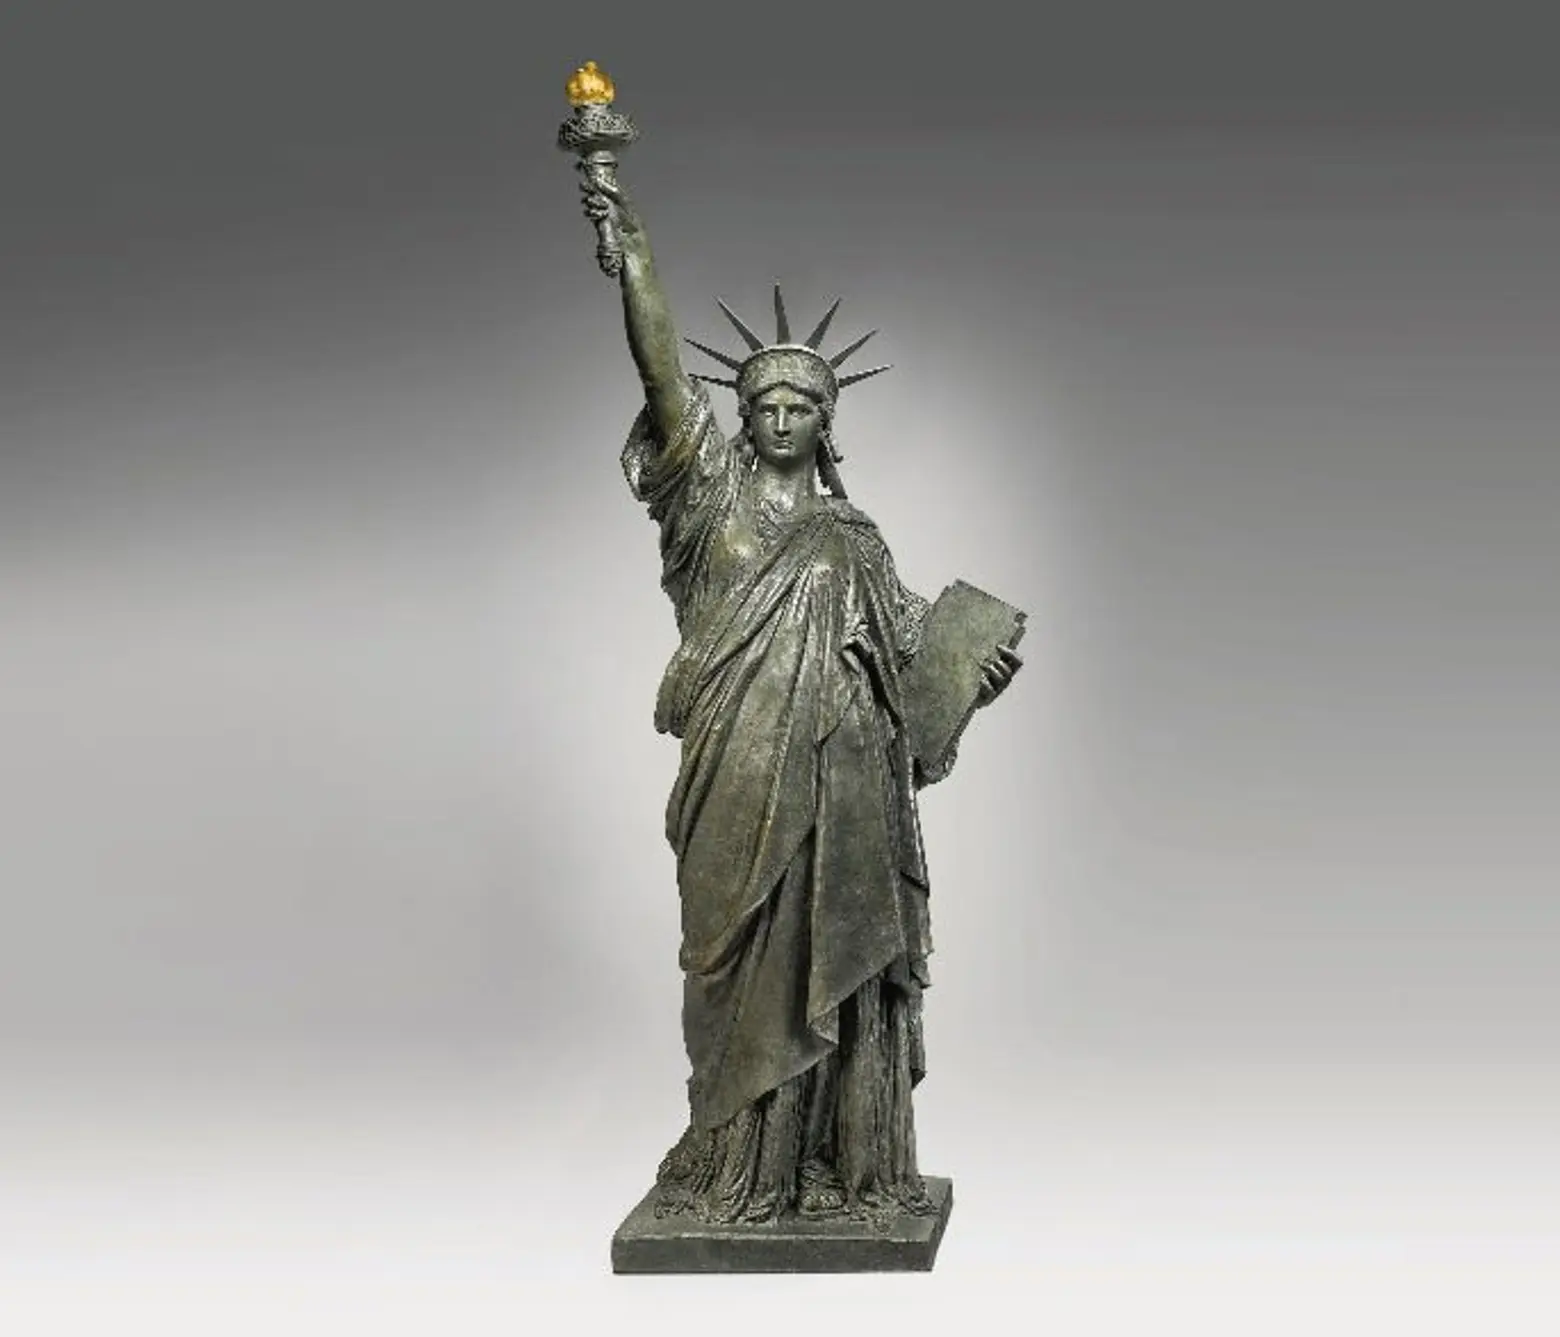 Sotheby's, The New York Sale auction, Bartholdi, Statue of Liberty model